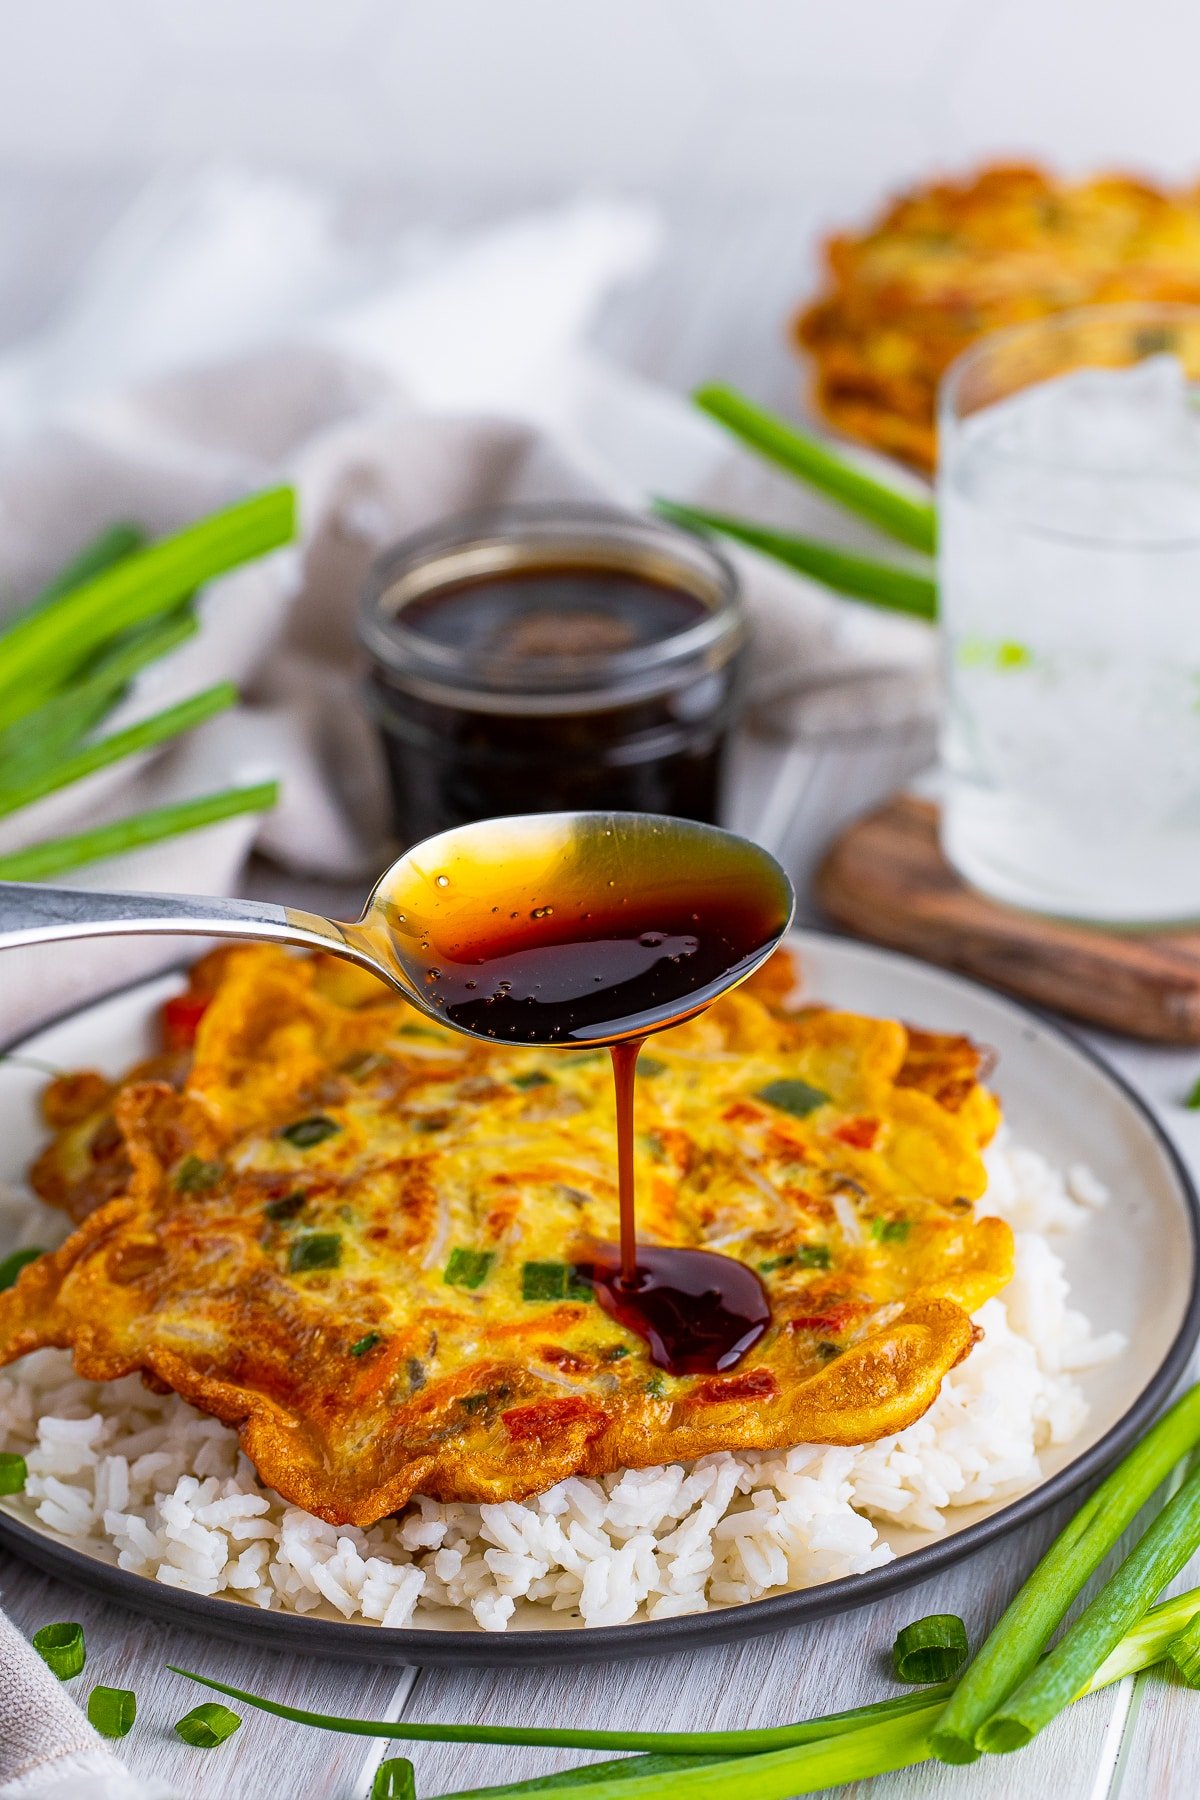 Vegetable Egg Foo Young Recipe on a plate with the gravy being drizzled on top with a silver spoon. Glass of ice water, scallions, and jar of sauce in the background